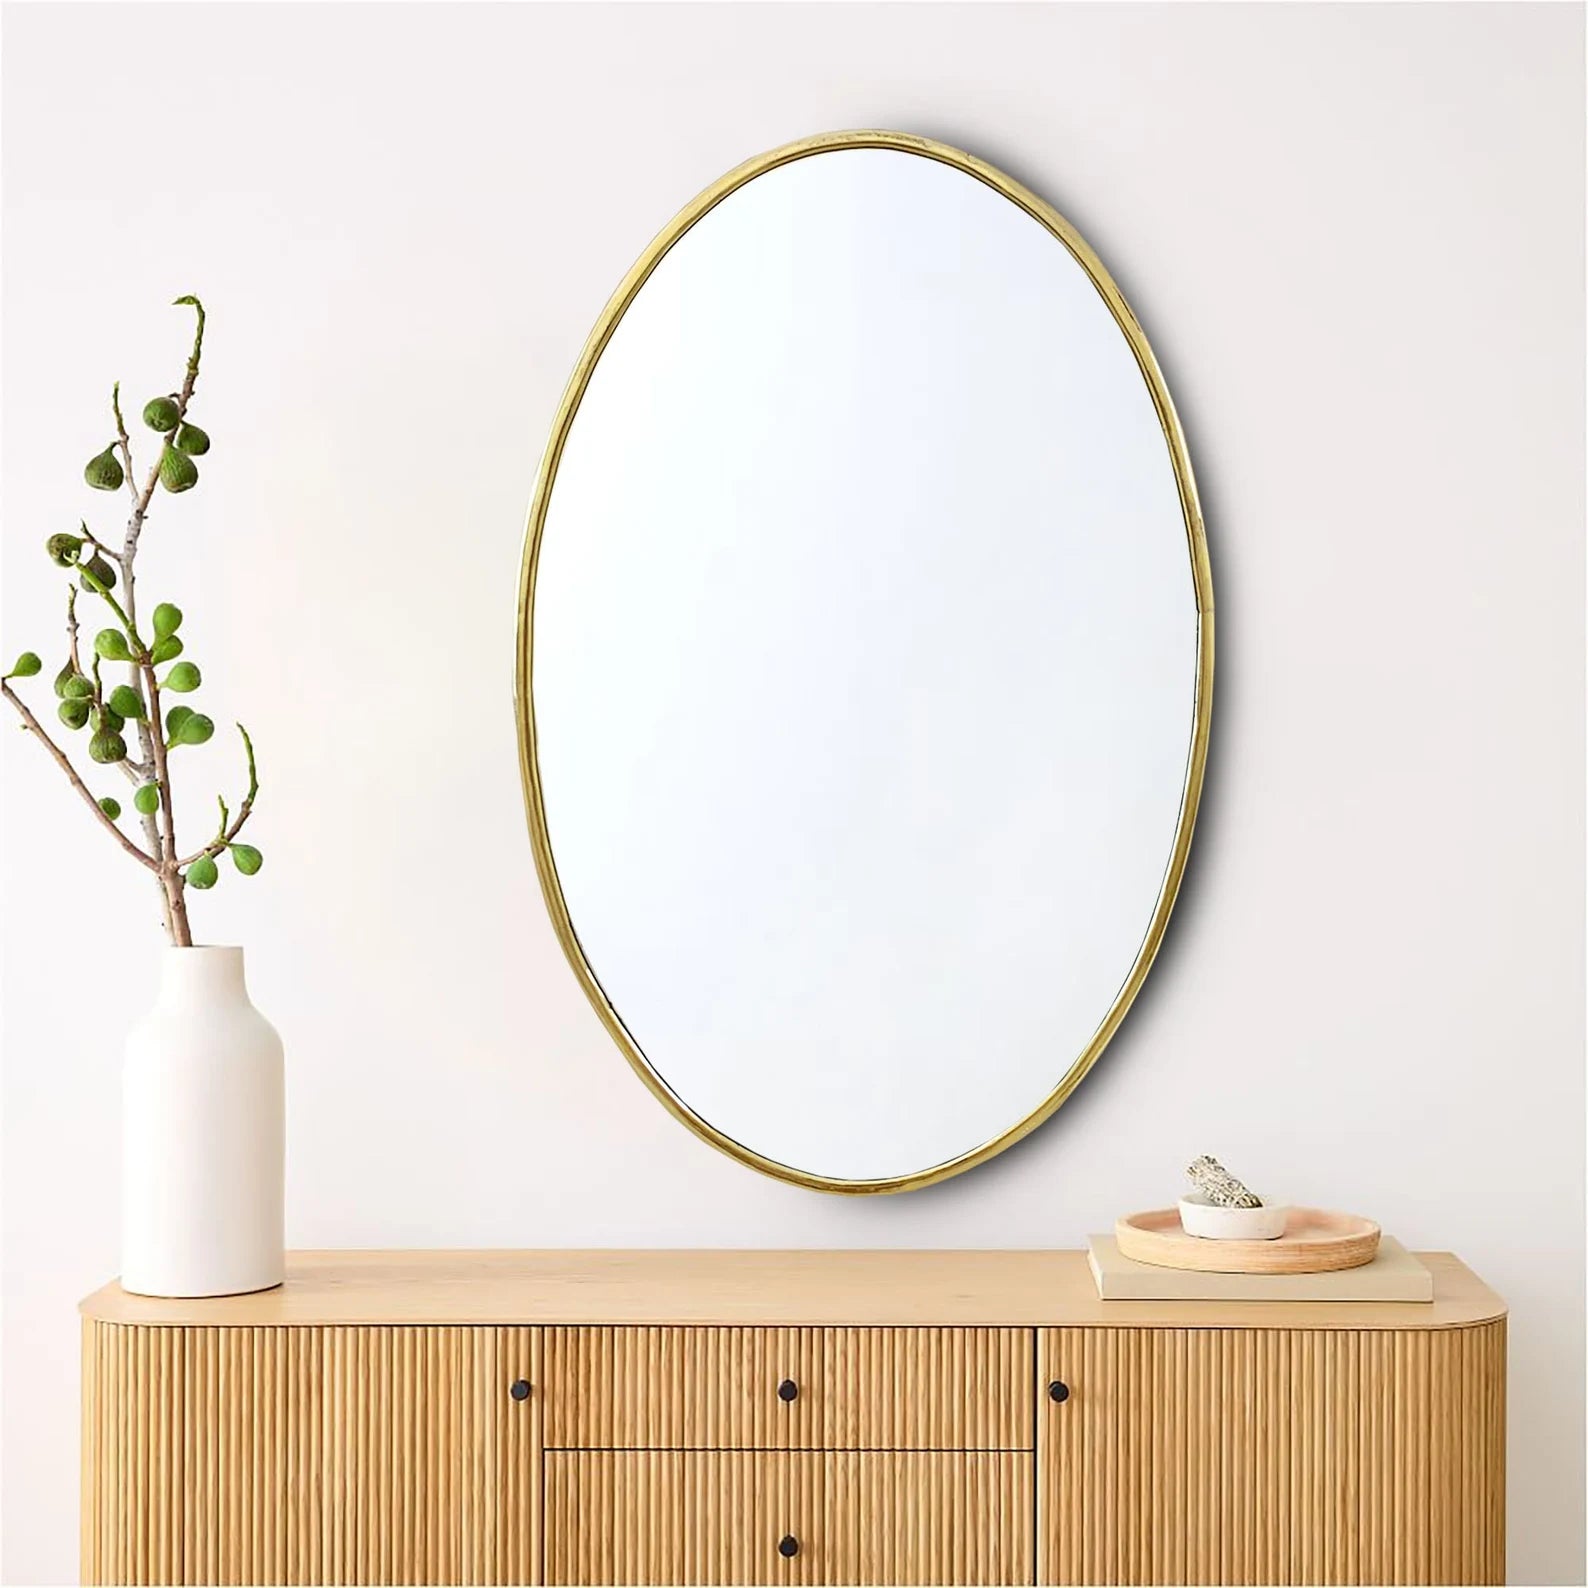 Handmade Oval Wall Mirror with Brass Frame